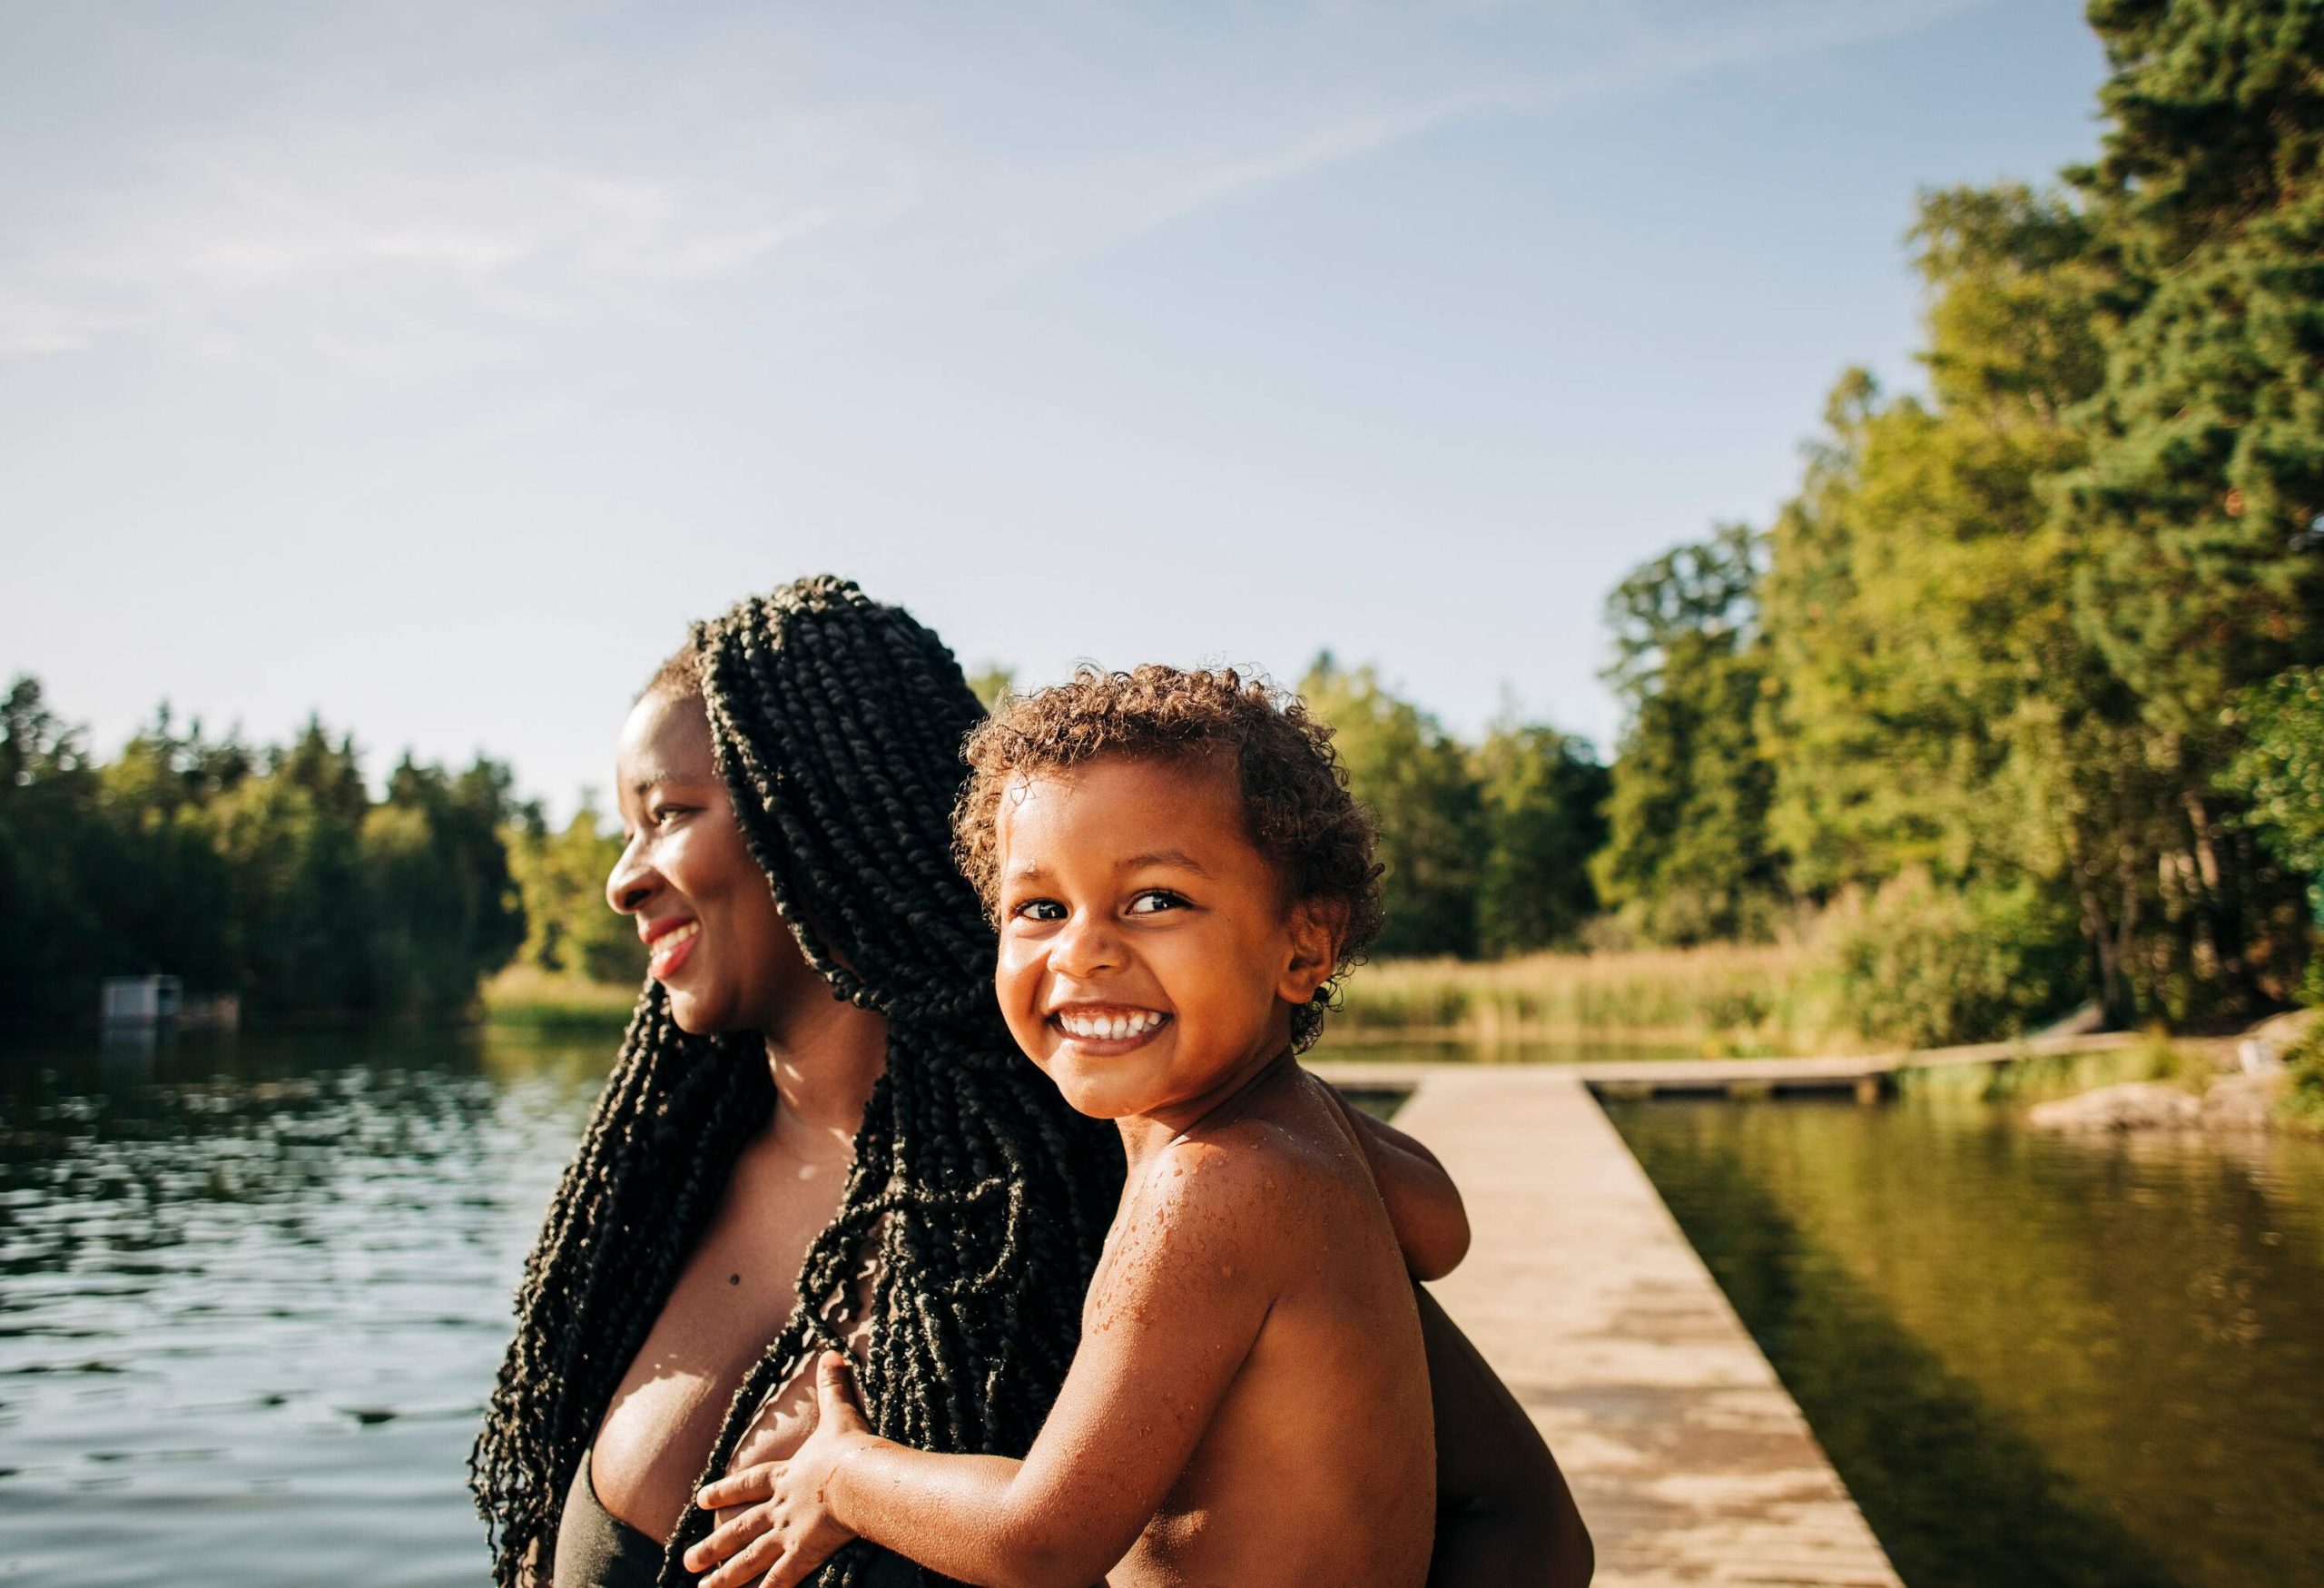 PORTRAIT OF MOTHER AND CHILD BY A LAKE ON A SUMMER DAY